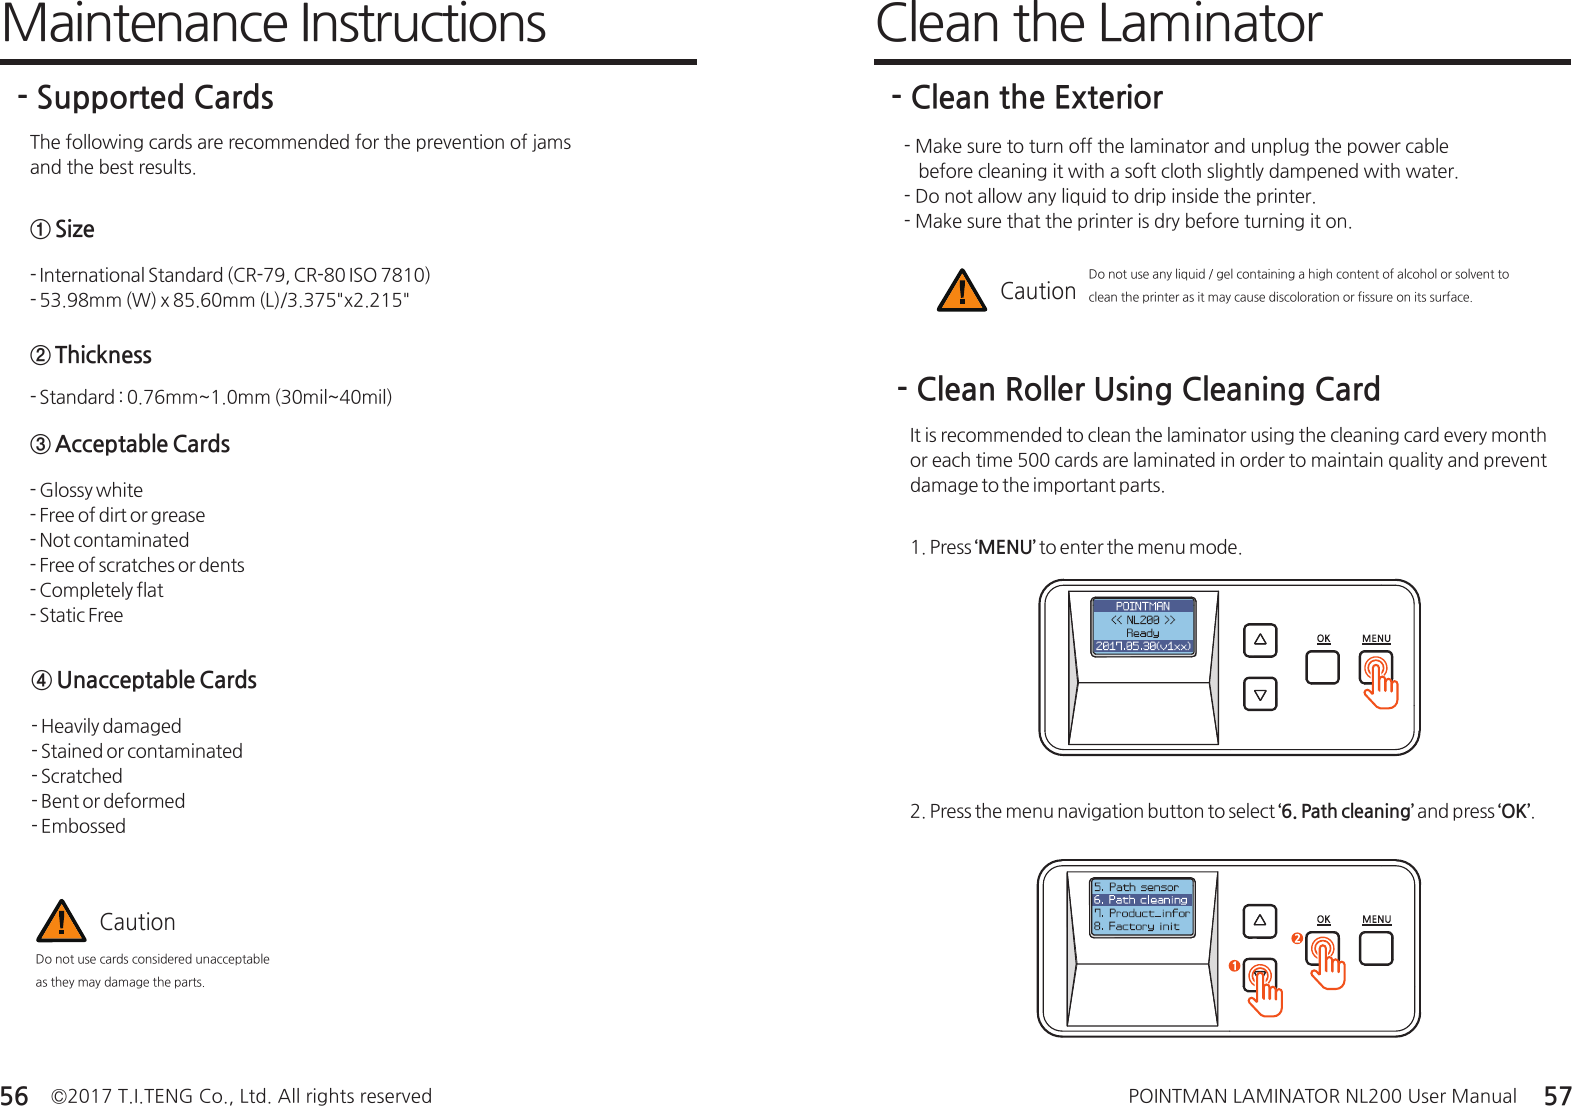 ©2017 T.I.TENG Co., Ltd. All rights reserved POINTMAN LAMINATOR NL200 User Manual56 57Maintenance Instructions- Supported CardsThe following cards are recommended for the prevention of jams and the best results.- International Standard (CR-79, CR-80 ISO 7810)- 53.98mm (W) x 85.60mm (L)/3.375&quot;x2.215&quot;① Size- Standard : 0.76mm~1.0mm (30mil~40mil)② Thickness- Glossy white- Free of dirt or grease- Not contaminated- Free of scratches or dents - Completely flat- Static Free③ Acceptable Cards- Heavily damaged- Stained or contaminated- Scratched- Bent or deformed- Embossed④ Unacceptable CardsDo not use cards considered unacceptable as they may damage the parts.Caution1. Press ‘MENU’ to enter the menu mode.- Clean Roller Using Cleaning CardIt is recommended to clean the laminator using the cleaning card every month or each time 500 cards are laminated in order to maintain quality and prevent damage to the important parts. 2. Press the menu navigation button to select ‘6. Path cleaning’ and press ‘OK’.- Make sure to turn off the laminator and unplug the power cable    before cleaning it with a soft cloth slightly dampened with water.- Do not allow any liquid to drip inside the printer.- Make sure that the printer is dry before turning it on.Do not use any liquid / gel containing a high content of alcohol or solvent to clean the printer as it may cause discoloration or fissure on its surface.CautionClean the Laminator- Clean the Exterior